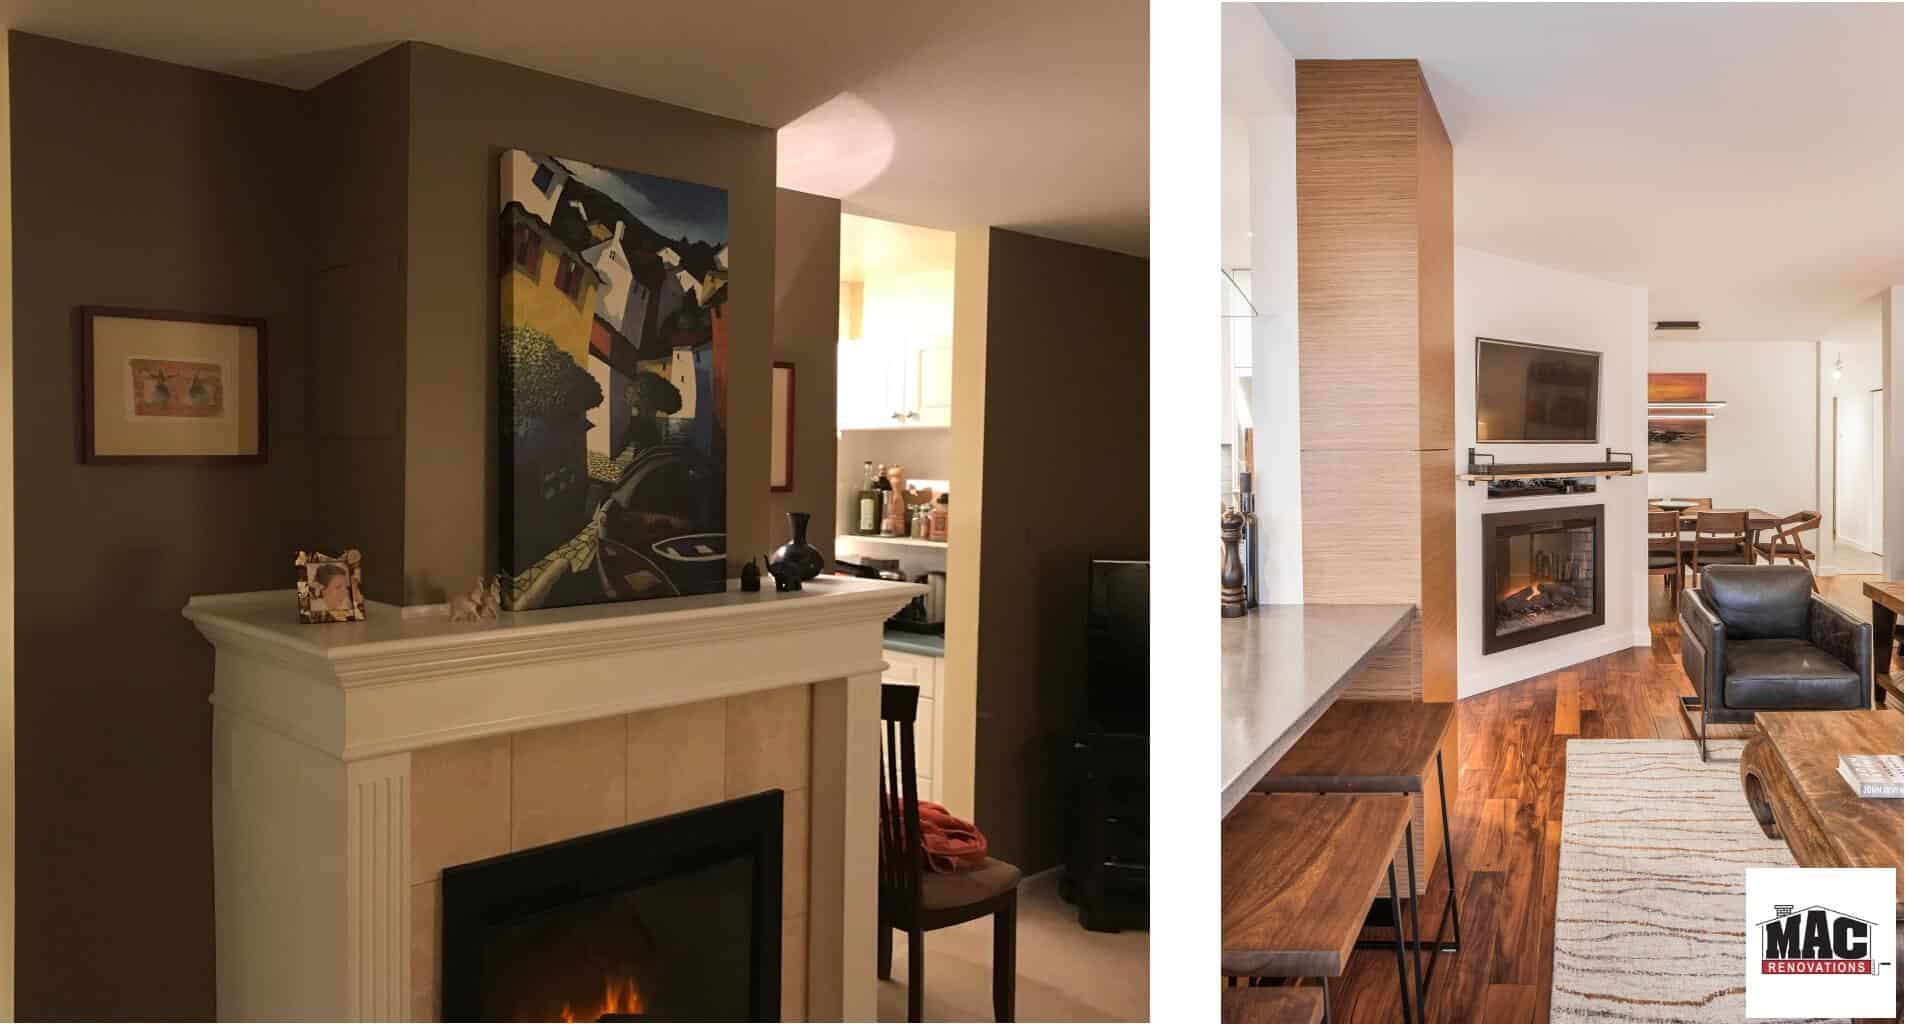 ThrowbackThursday - Condo Love | MAC Renovations - Victoria's Trusted Renovation Team